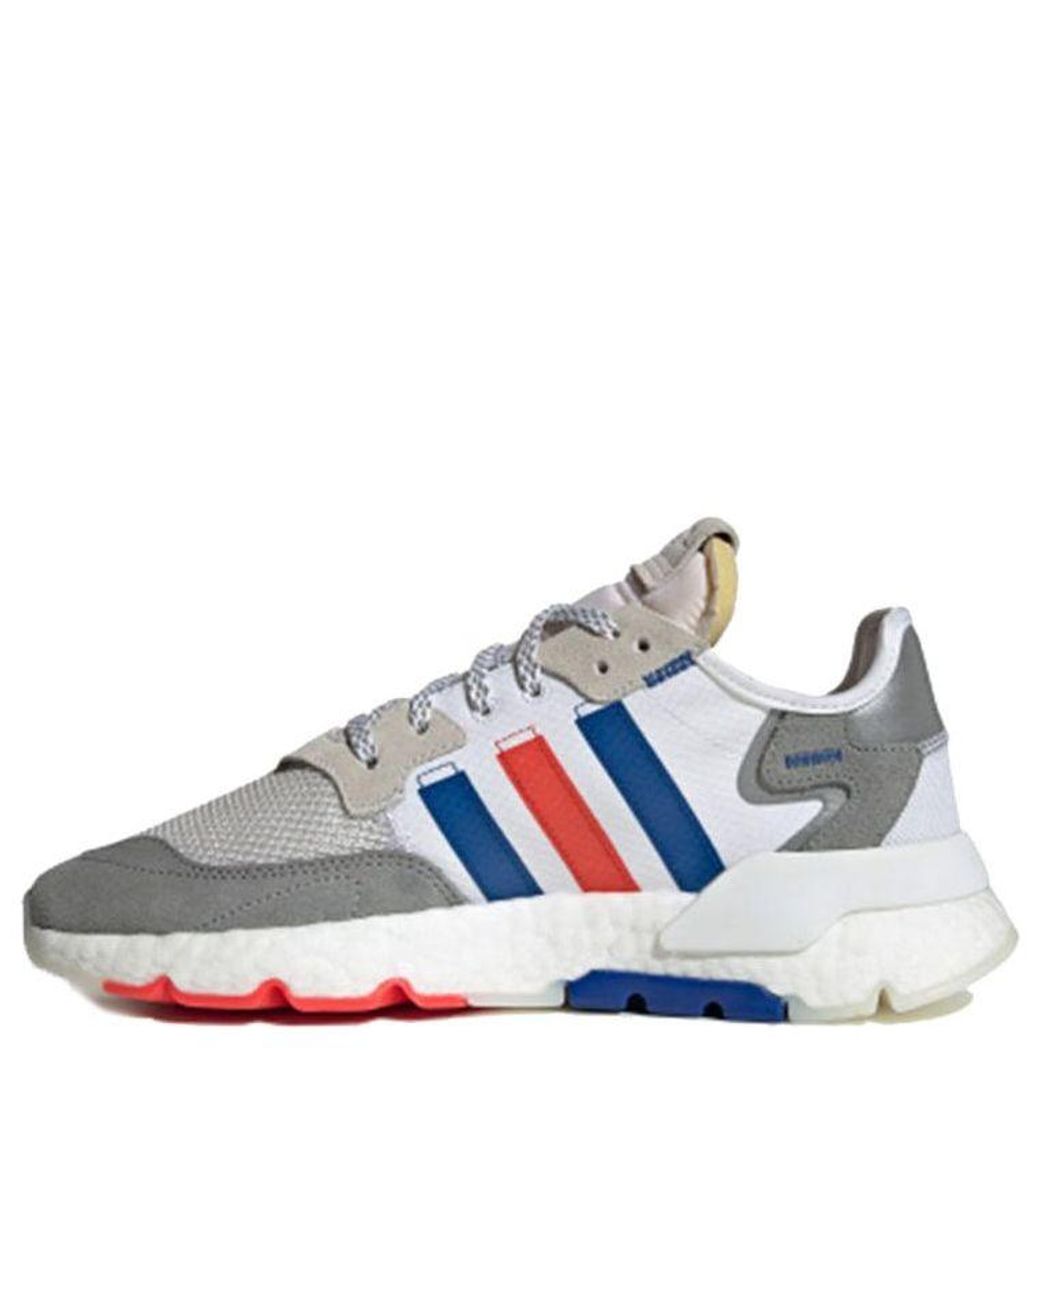 adidas Nite jogger 'cloud White/power Blue/bright Red' for Men | Lyst